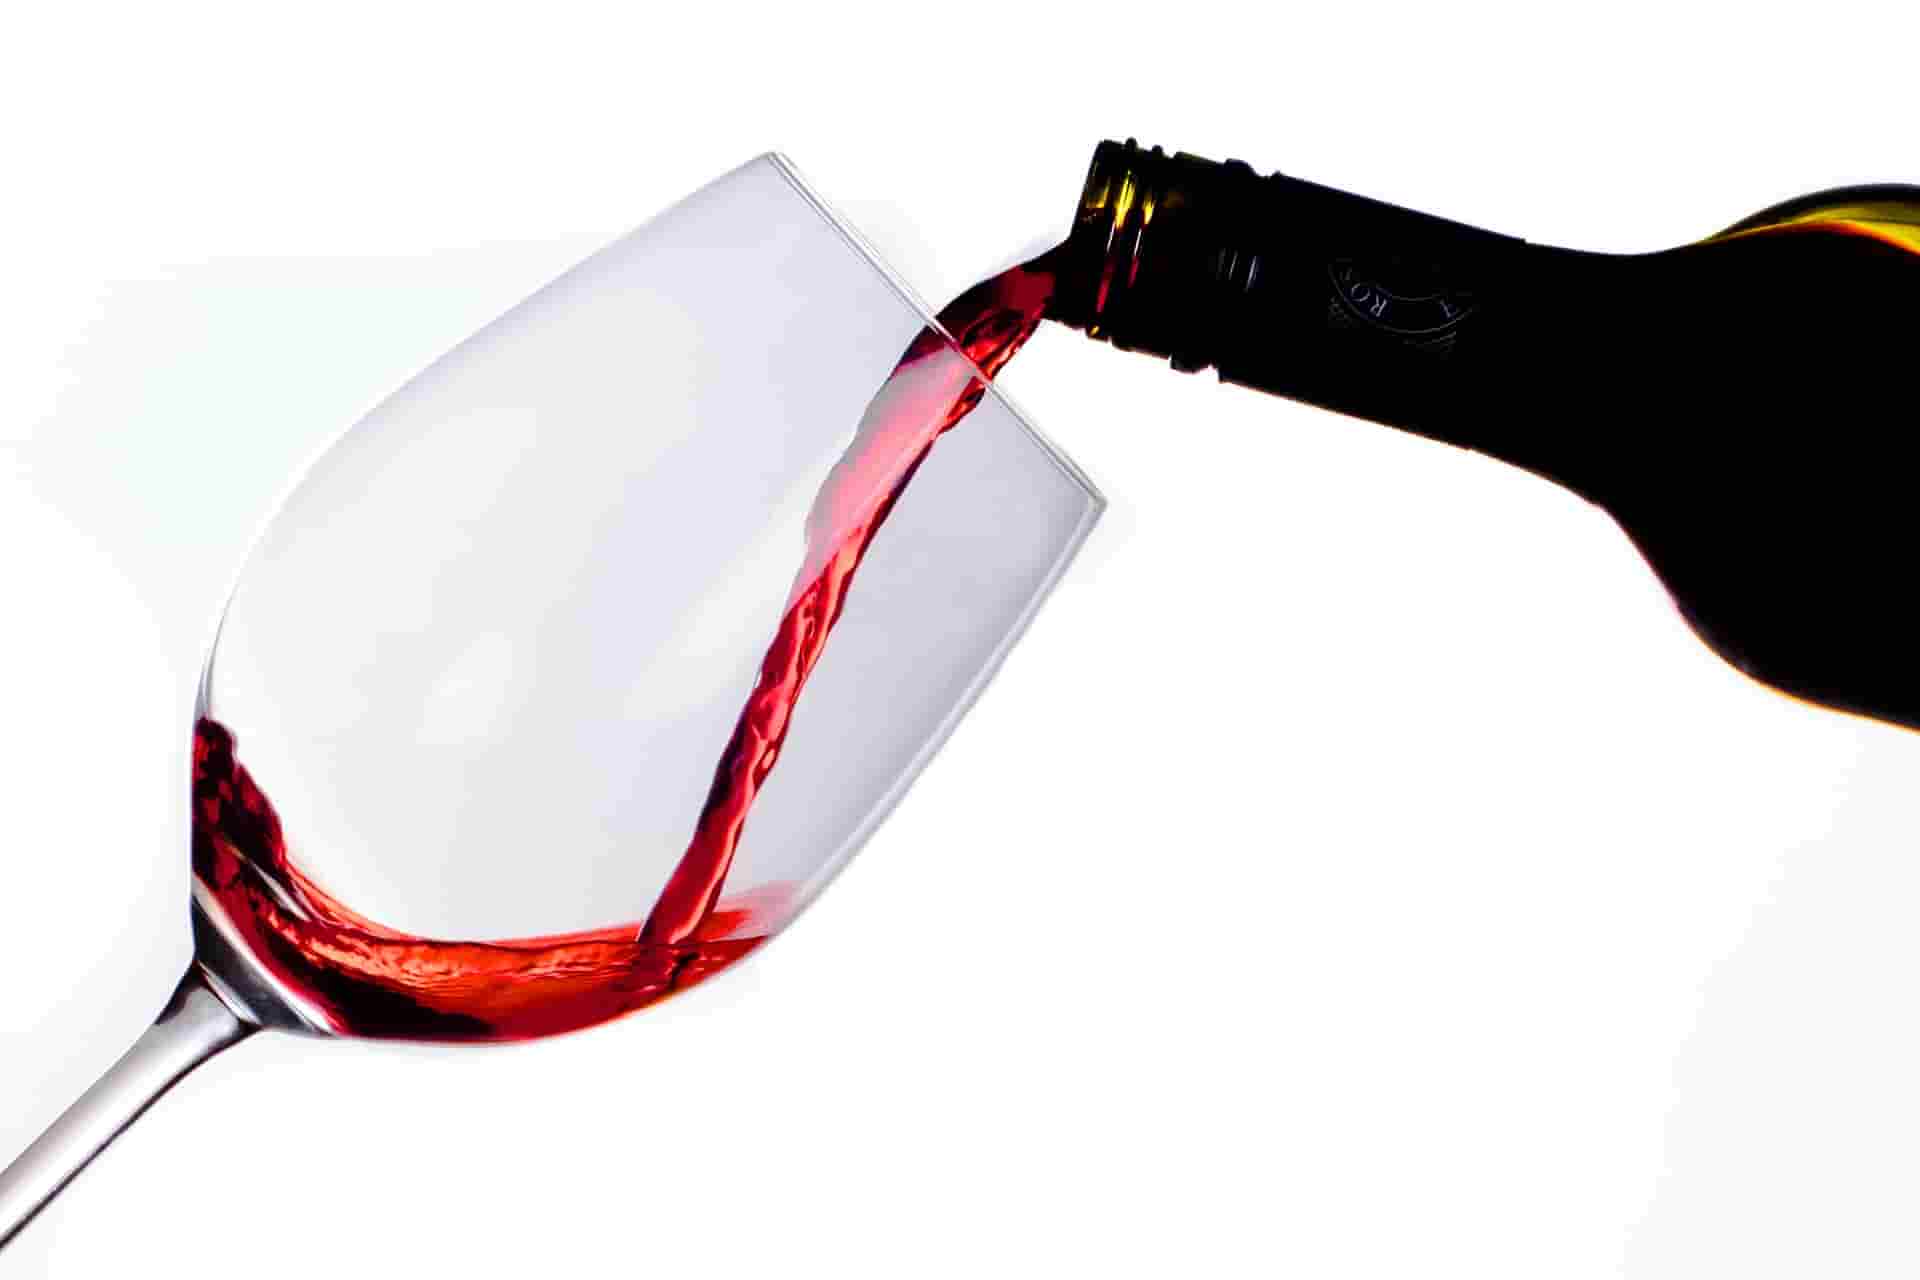 wine pouring in glass